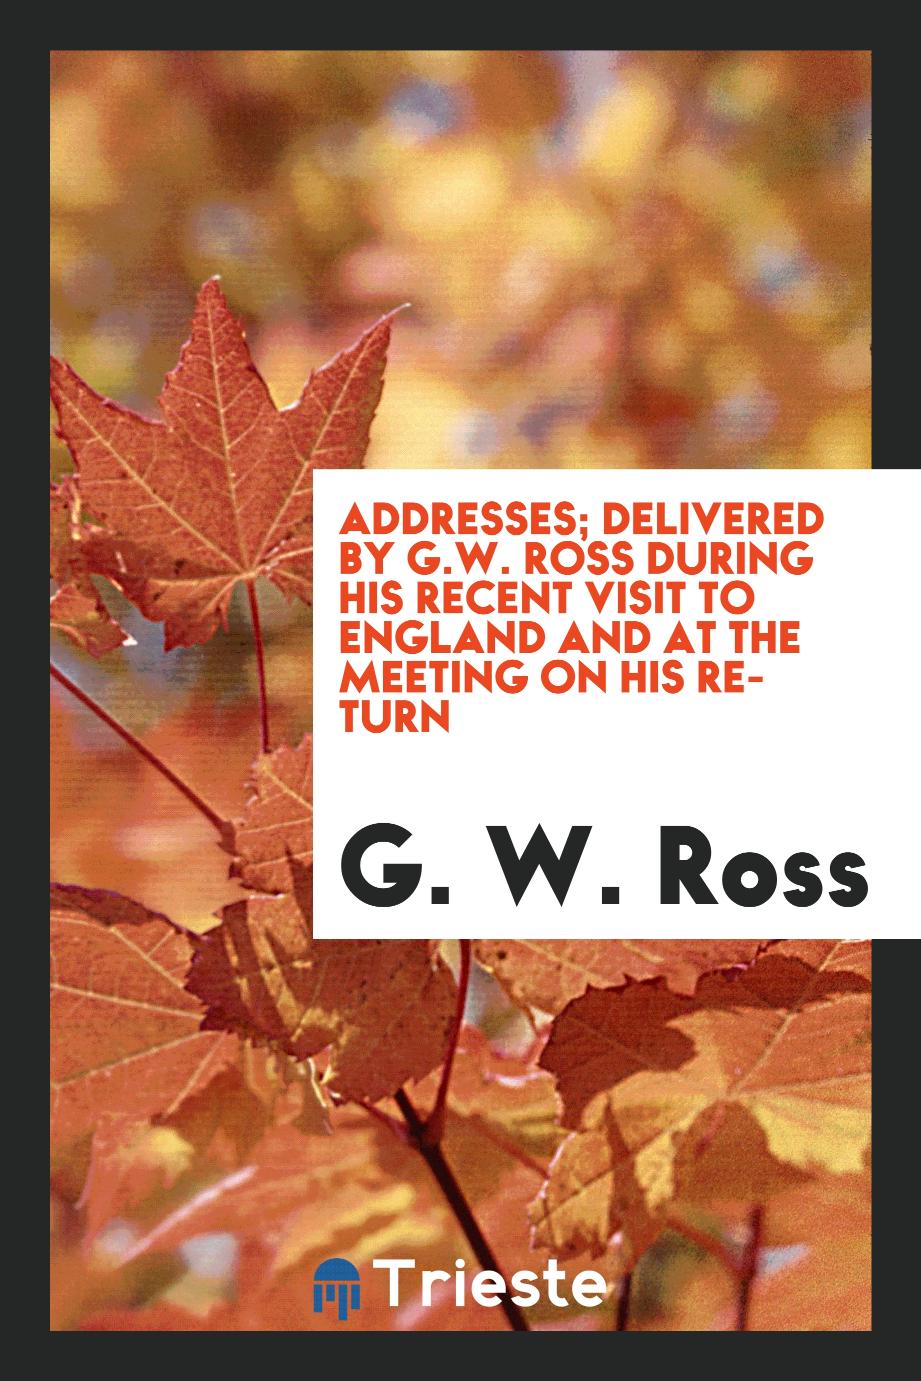 Addresses; delivered by G.W. Ross during his recent visit to England and at the meeting on his return